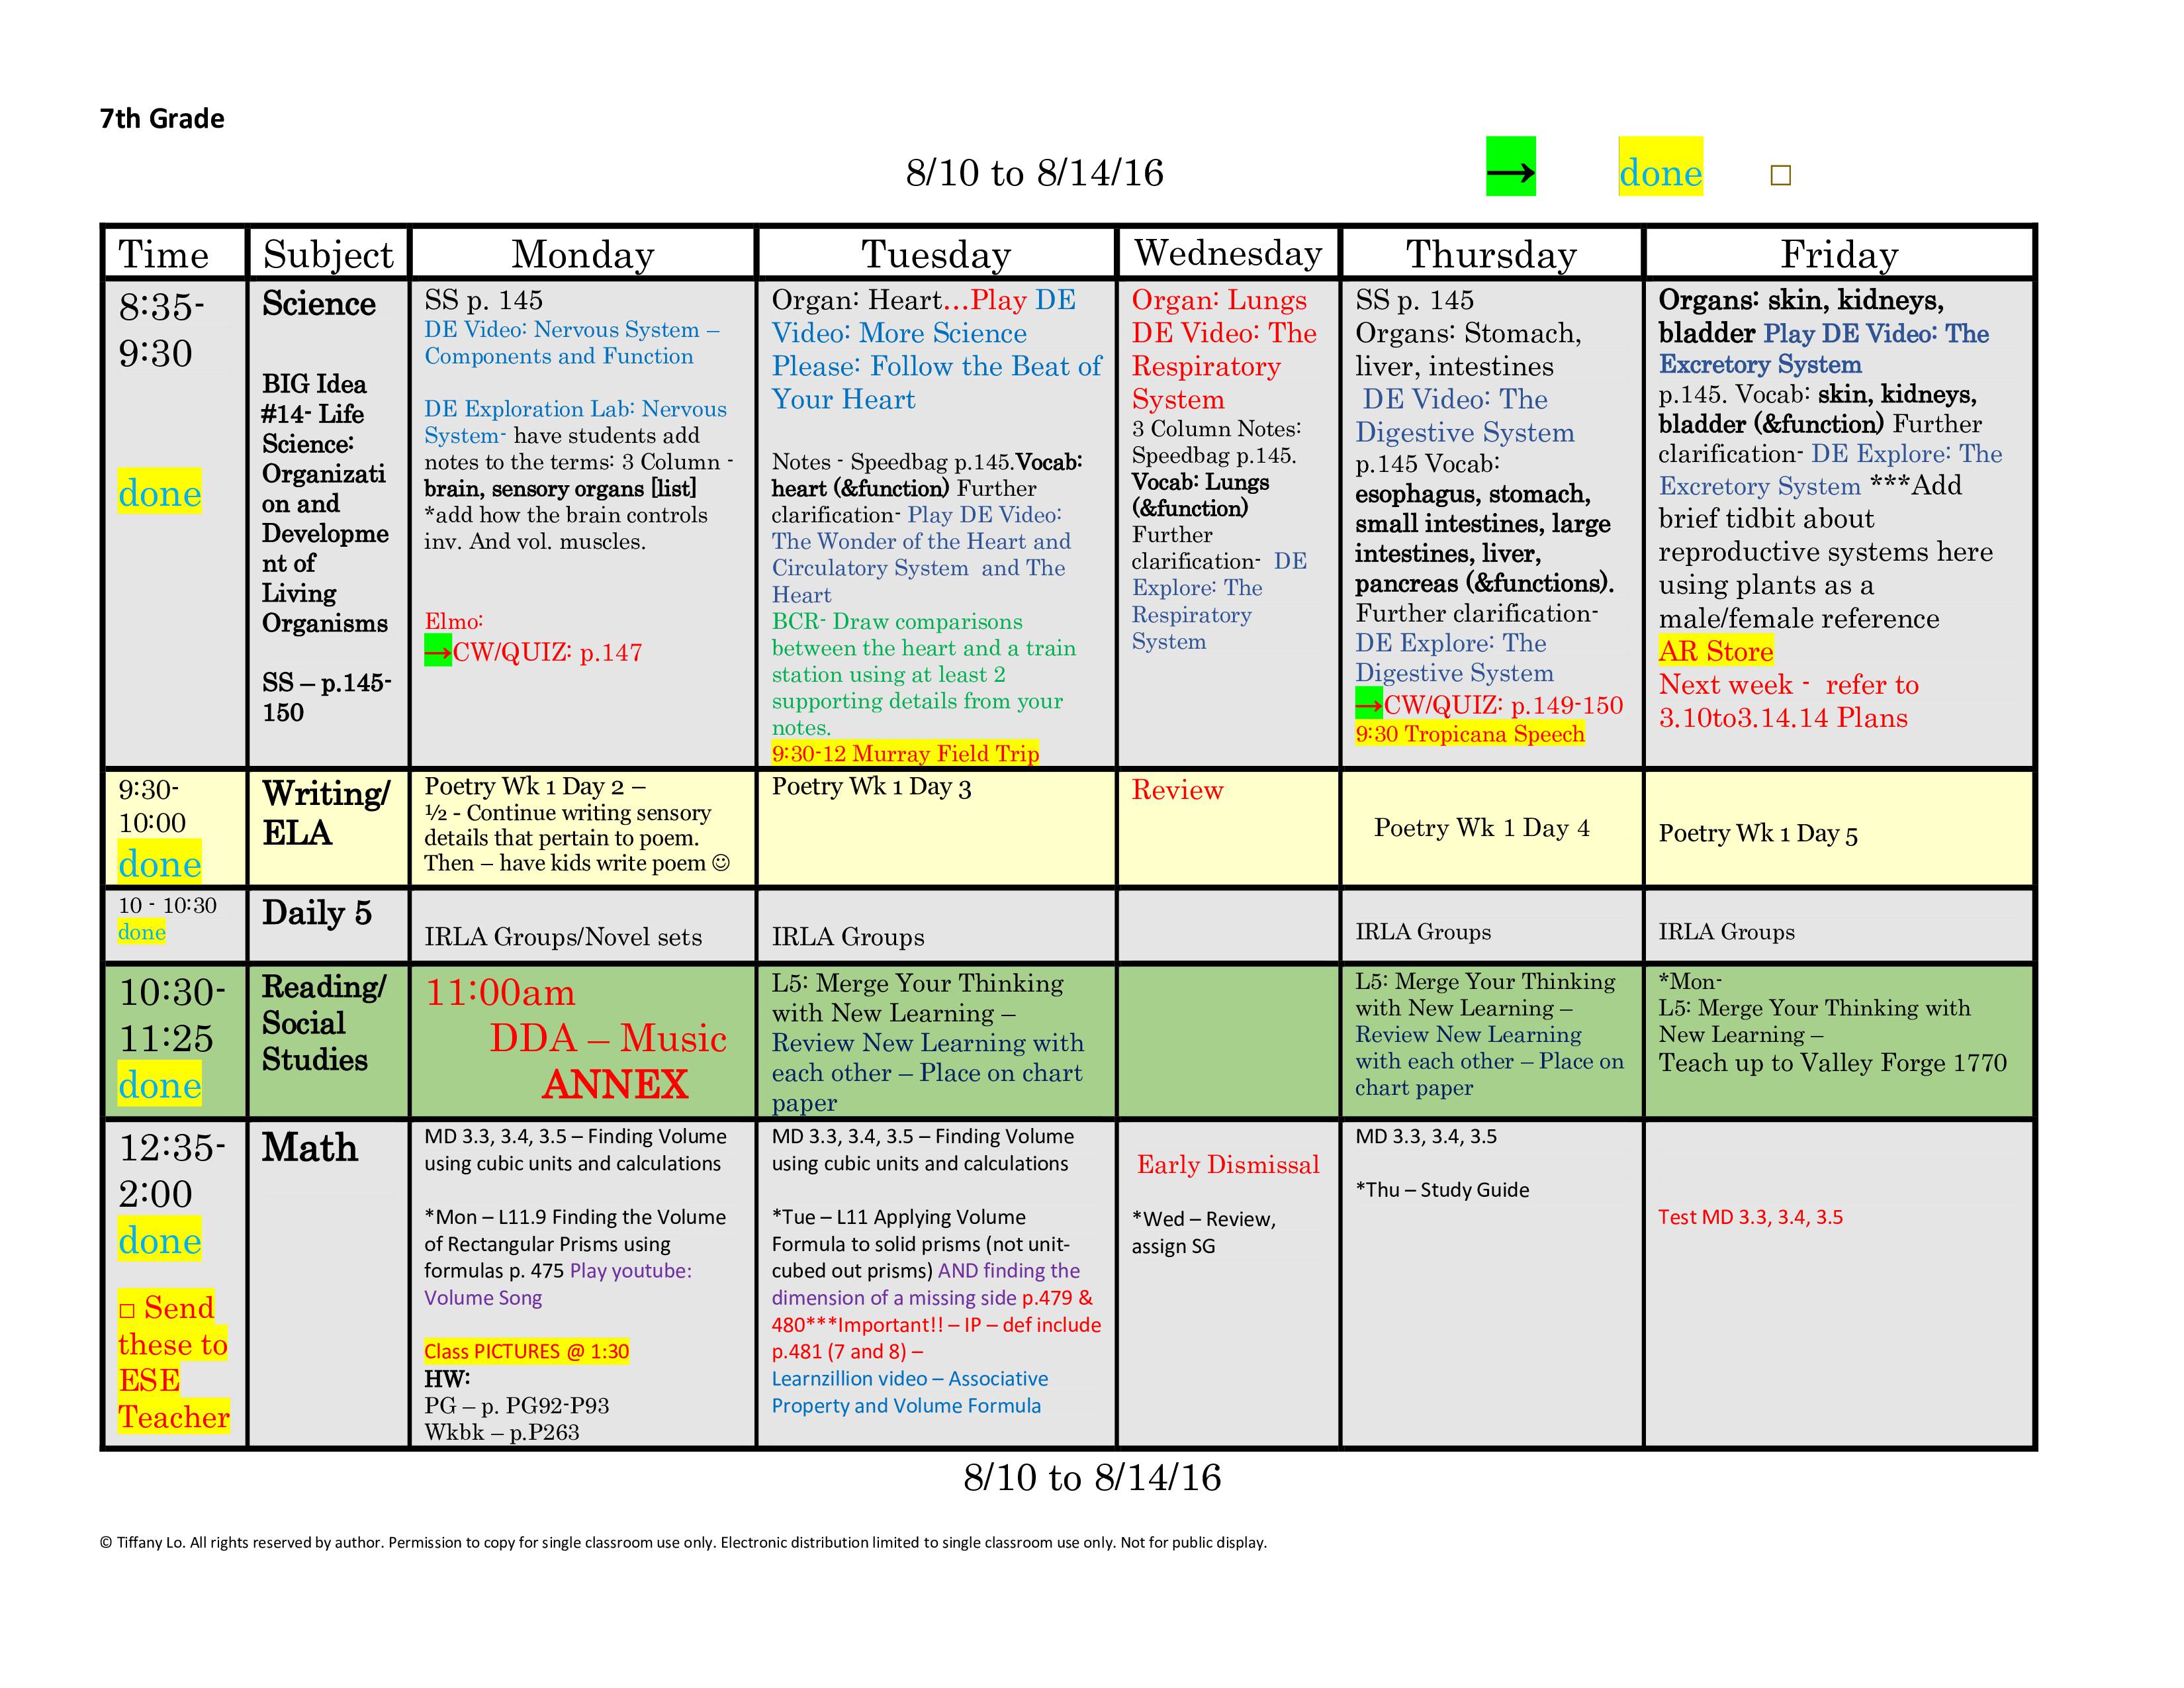 7th-seventh-grade-lesson-plan-template-one-week-one-page-glance-of-all-subjects-with-common